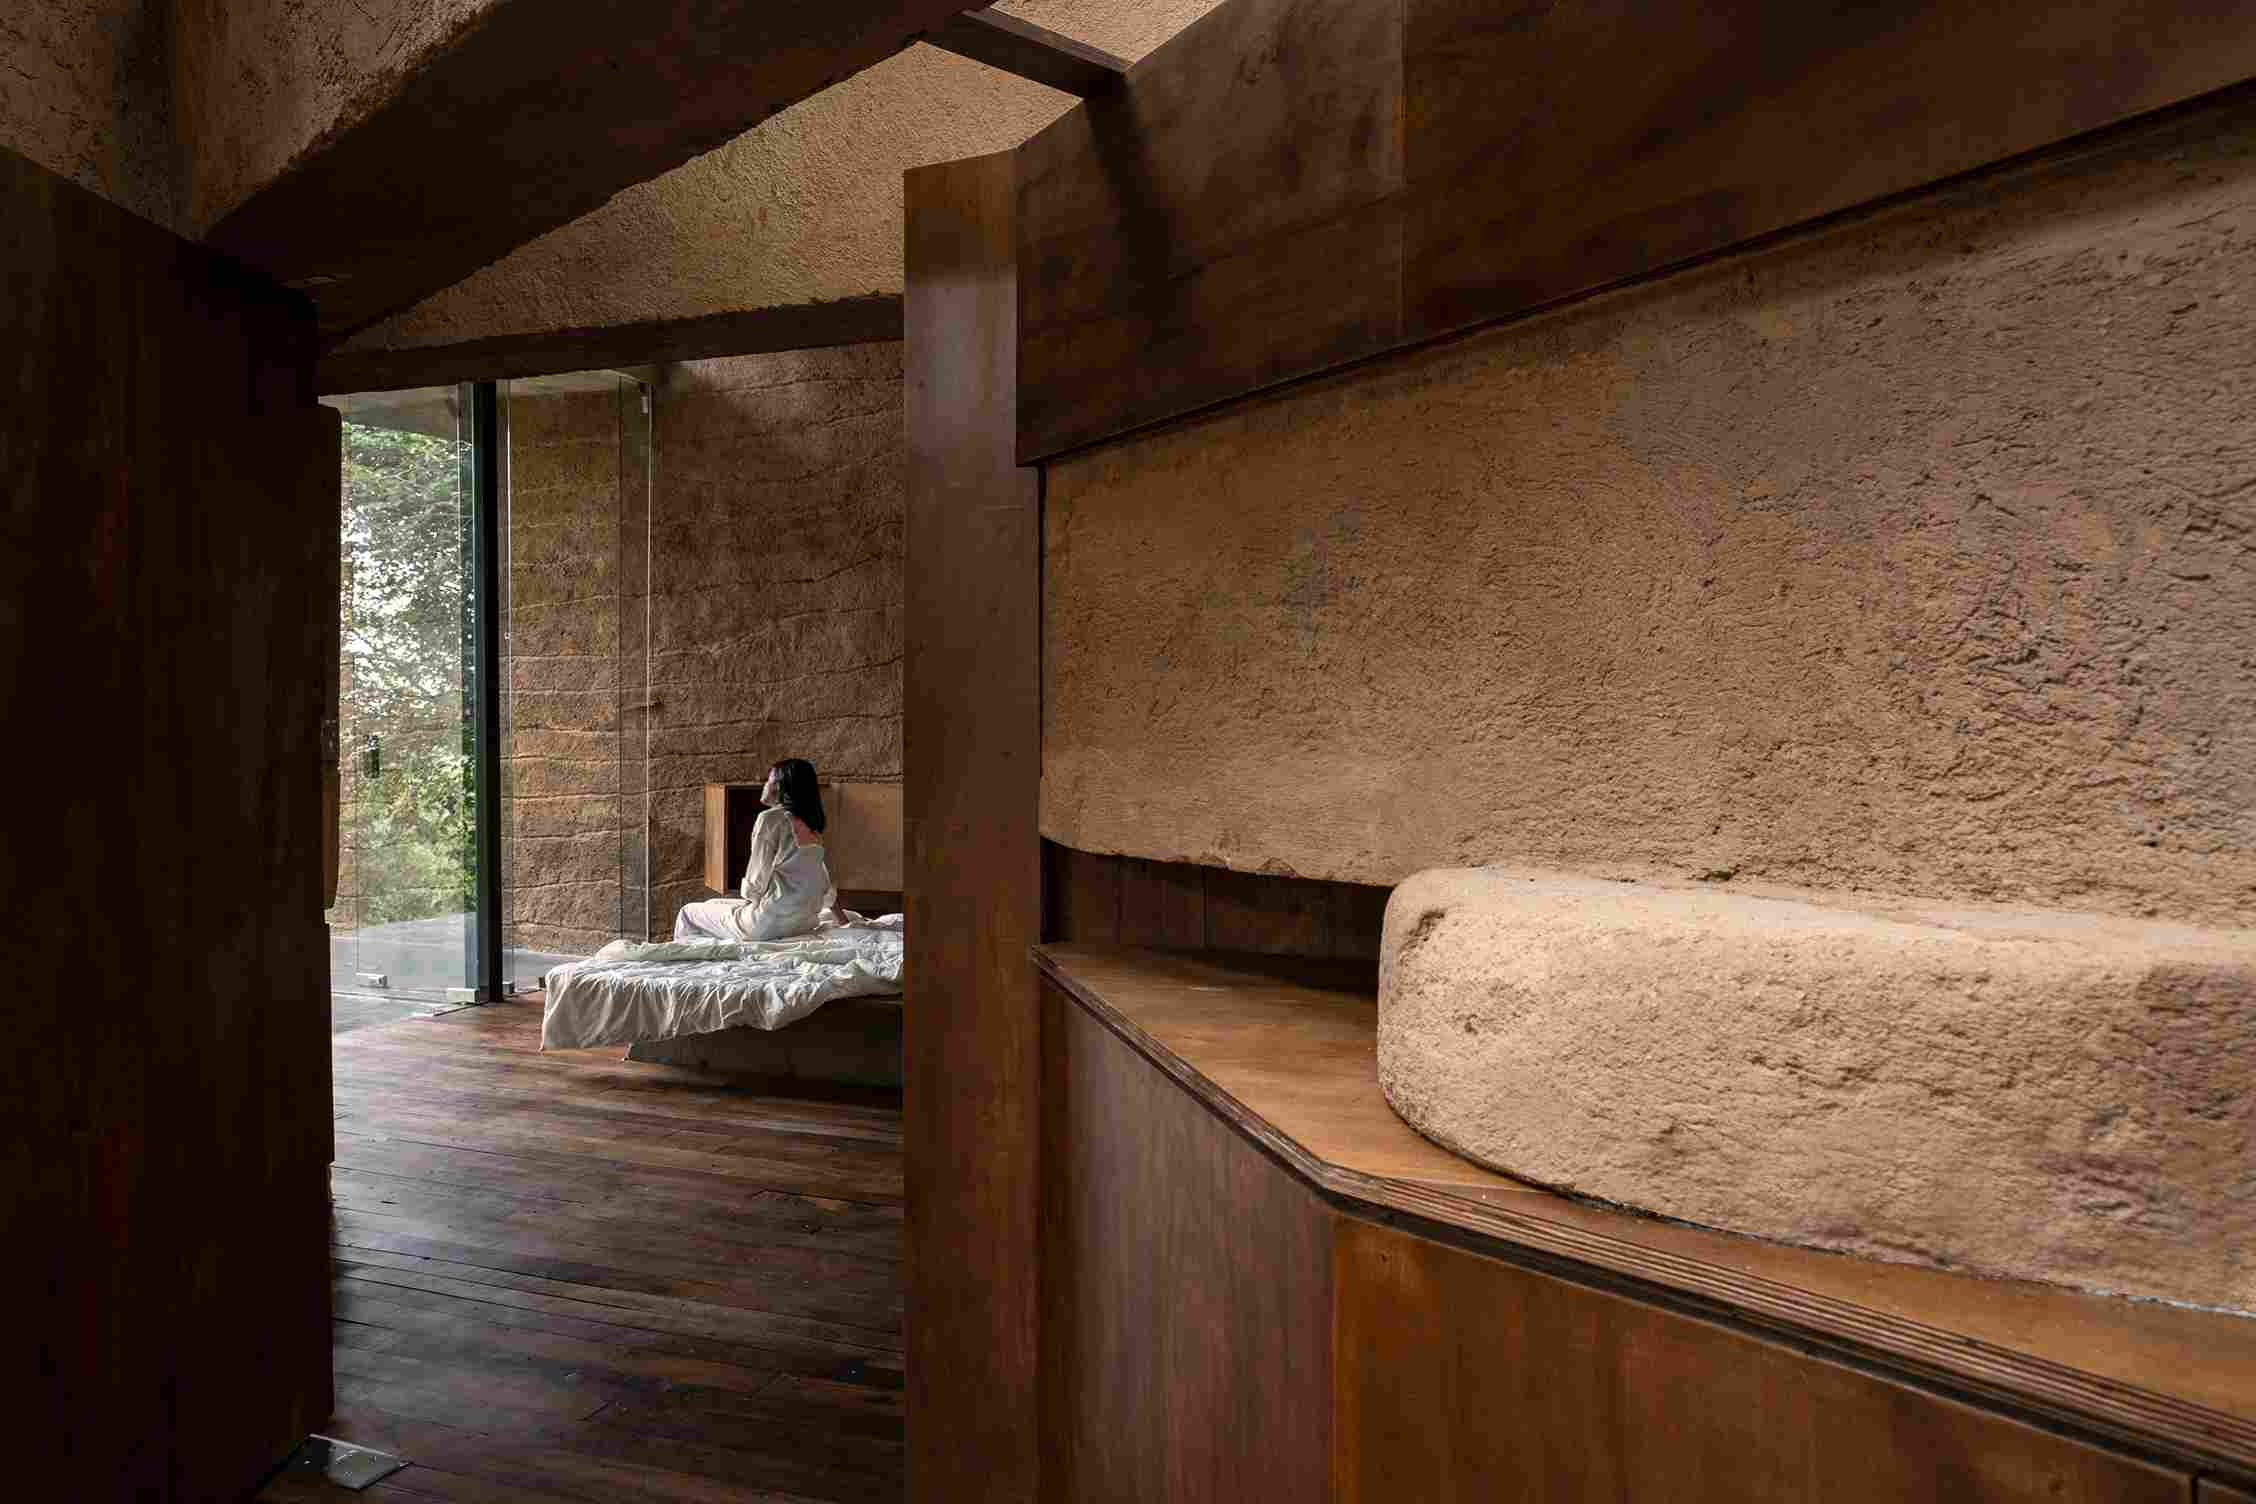 The sustainable home integrates mud with cement to form a structure that can withstand different temperatures